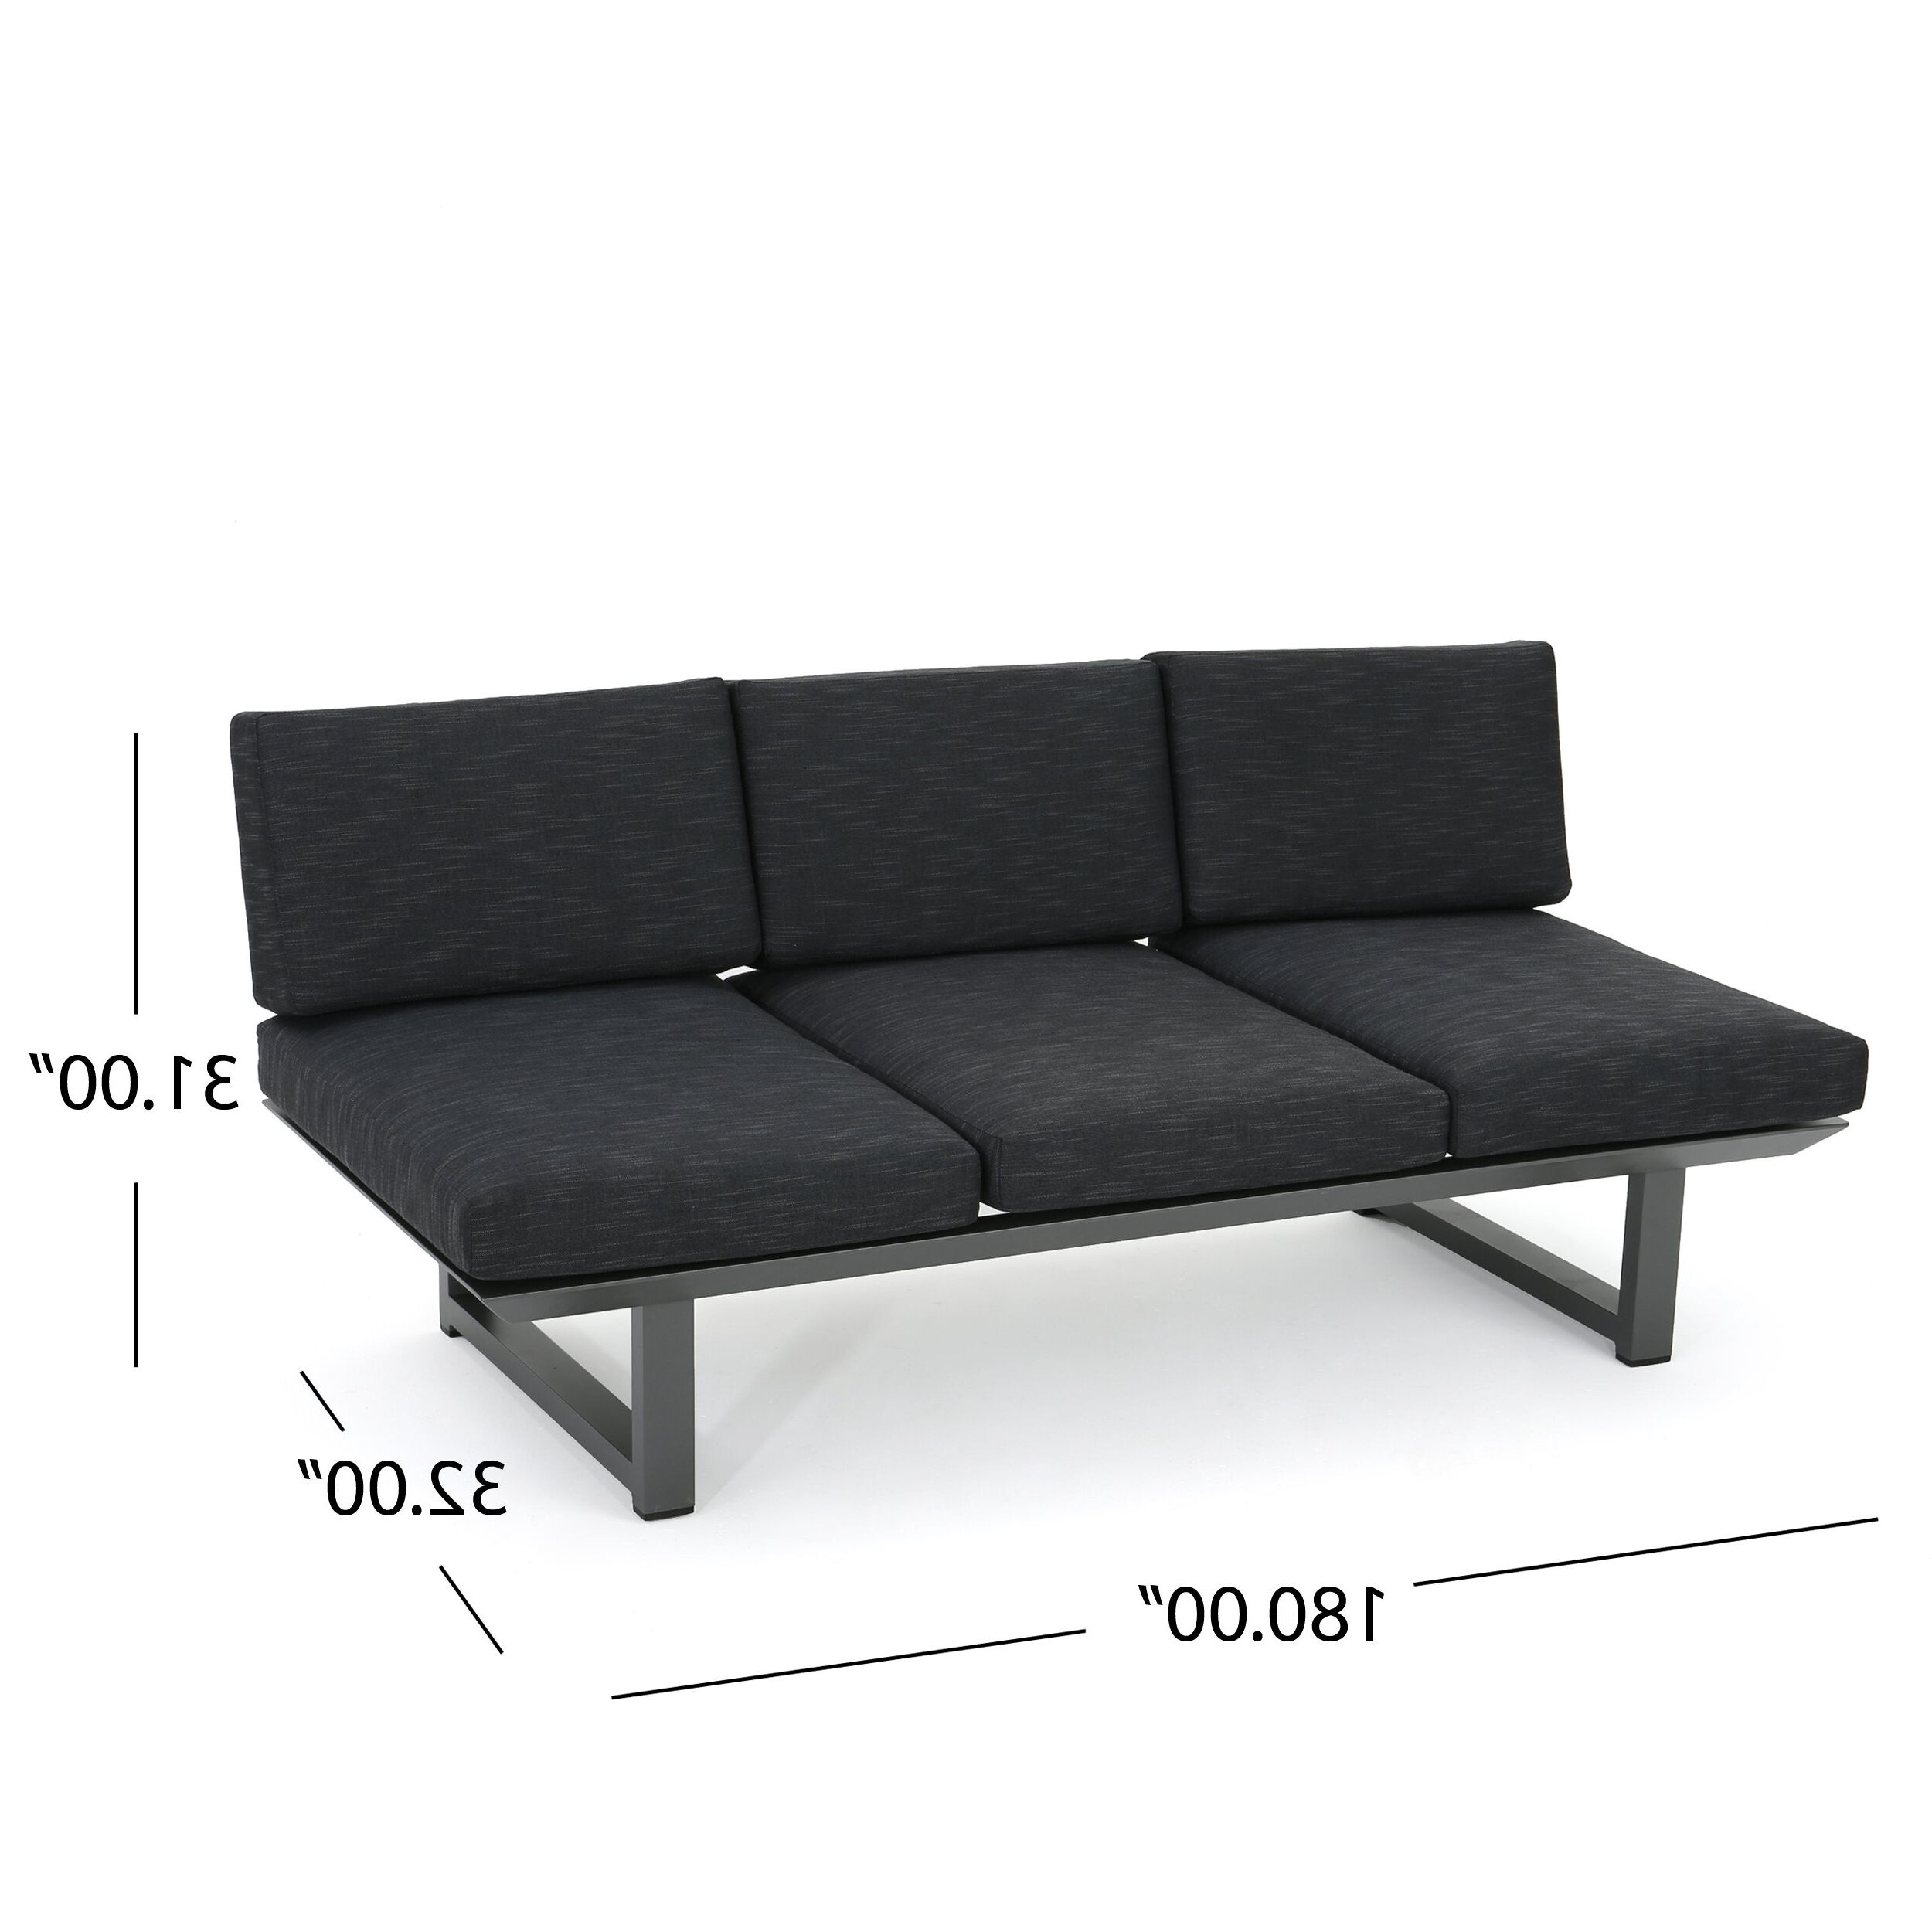 2020 Lobdell Patio Sofa With Cushions Pertaining To Lobdell Patio Sofas With Cushions (View 7 of 25)